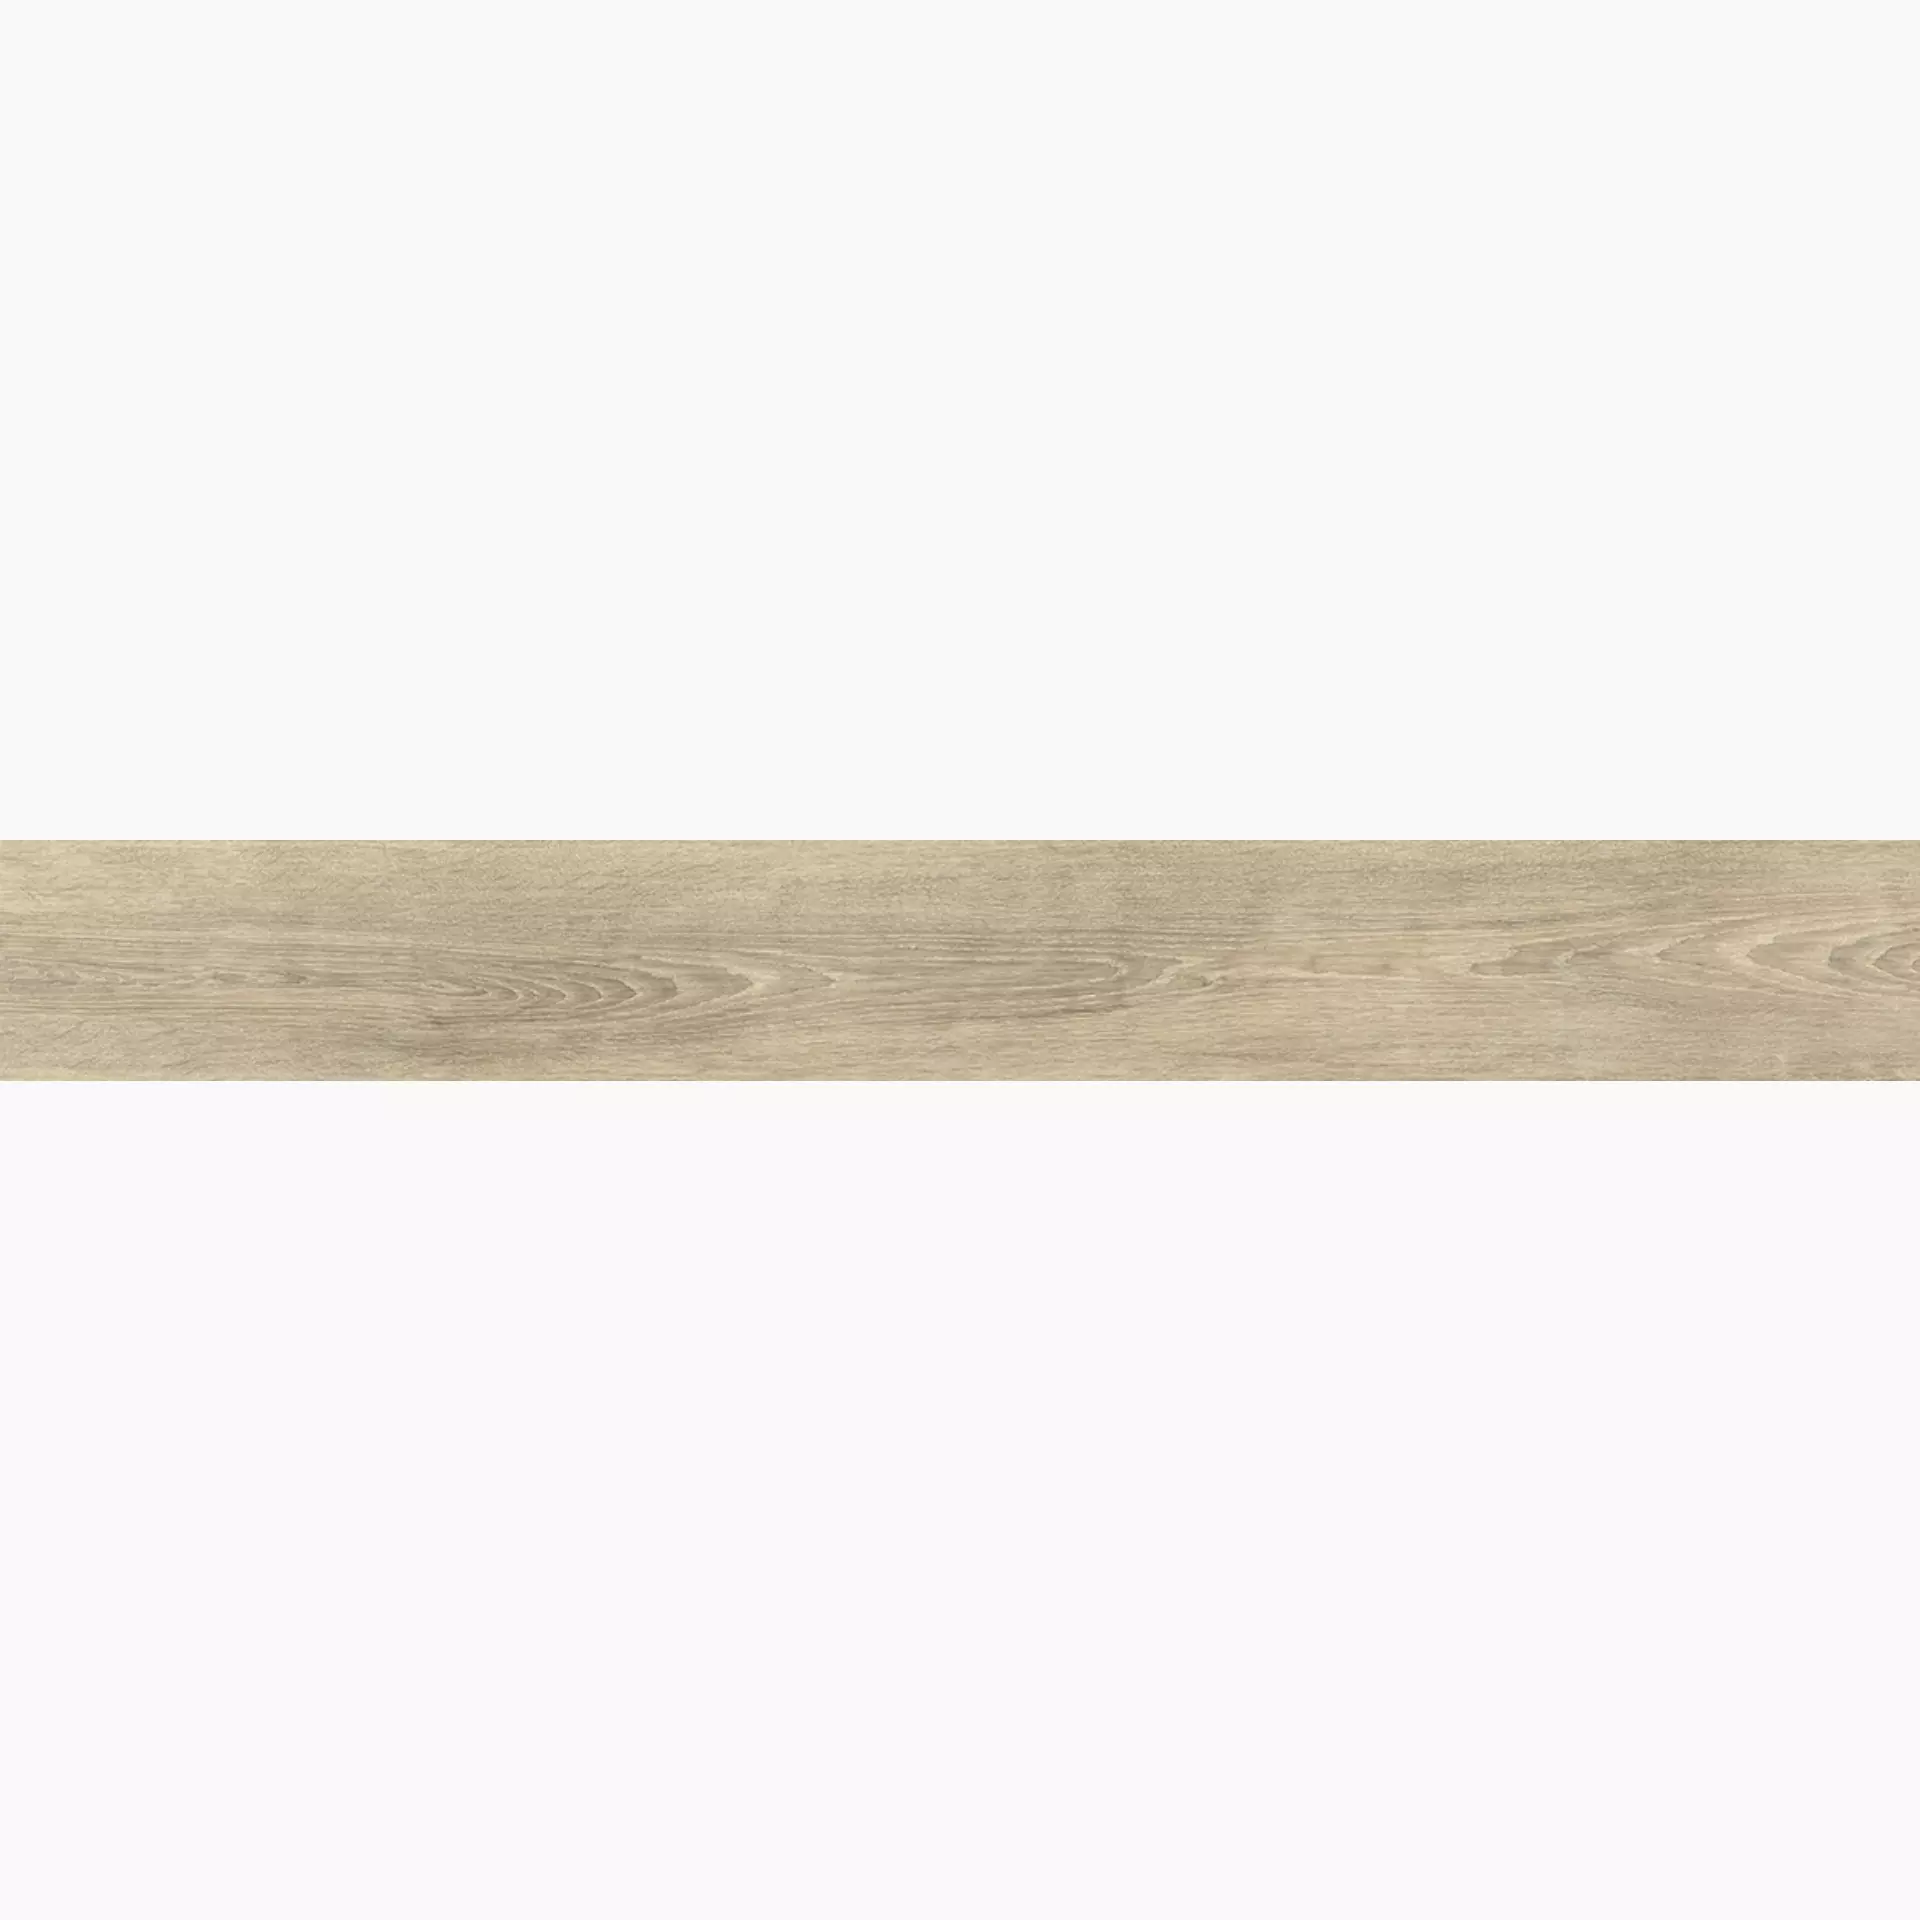 Ergon Woodtouch Miele Naturale E0M3 22,5x180cm rectified 10mm